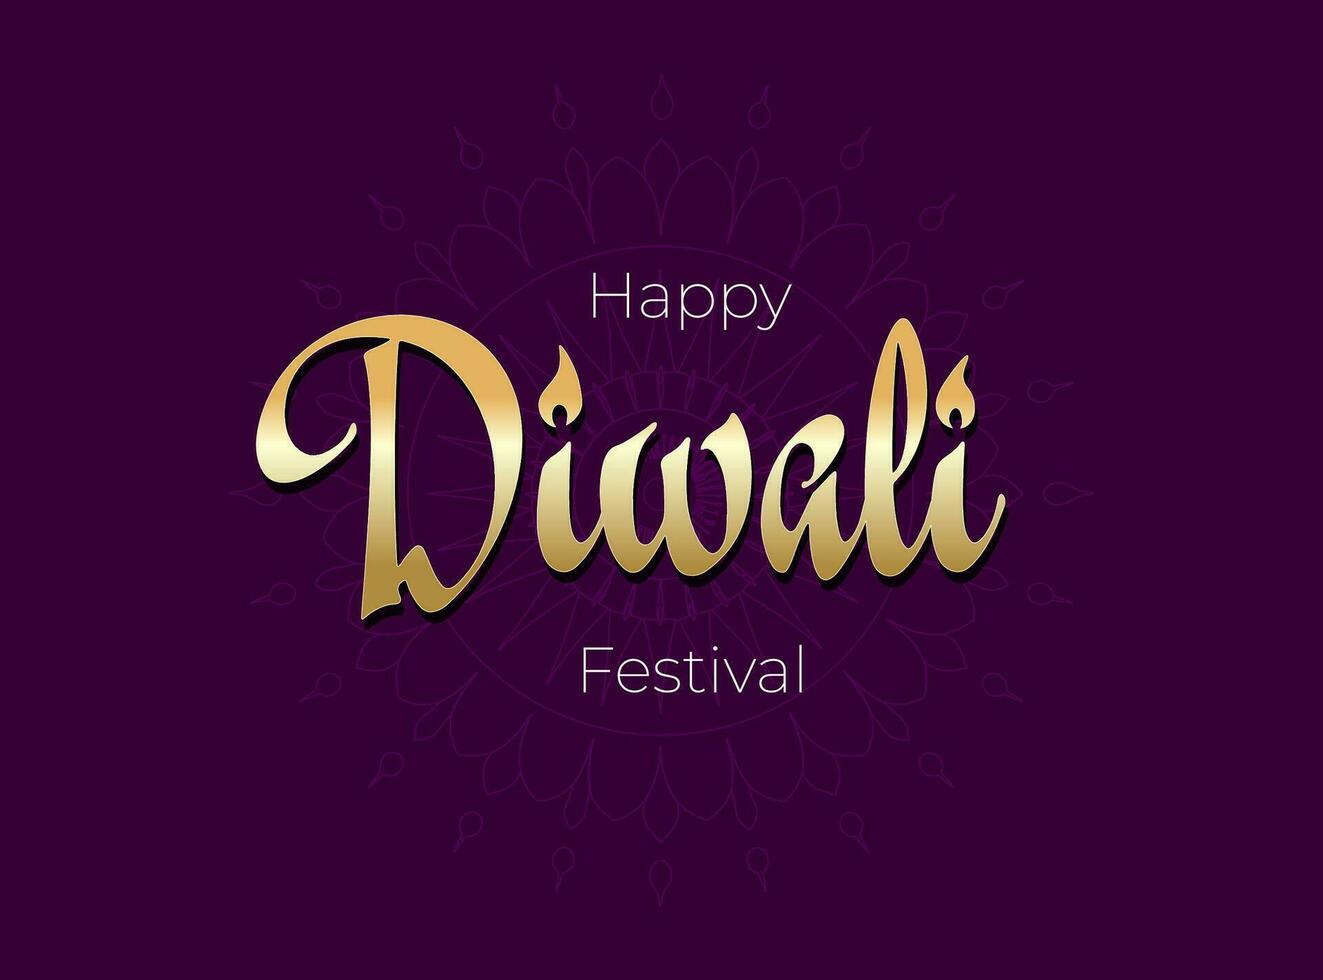 Indian holiday Happy Diwali logo concept. Deepavali India festival of lights gold color logotype template. Hindu traditional celebration lettering with diya oil lamp flames. Creative art vector design